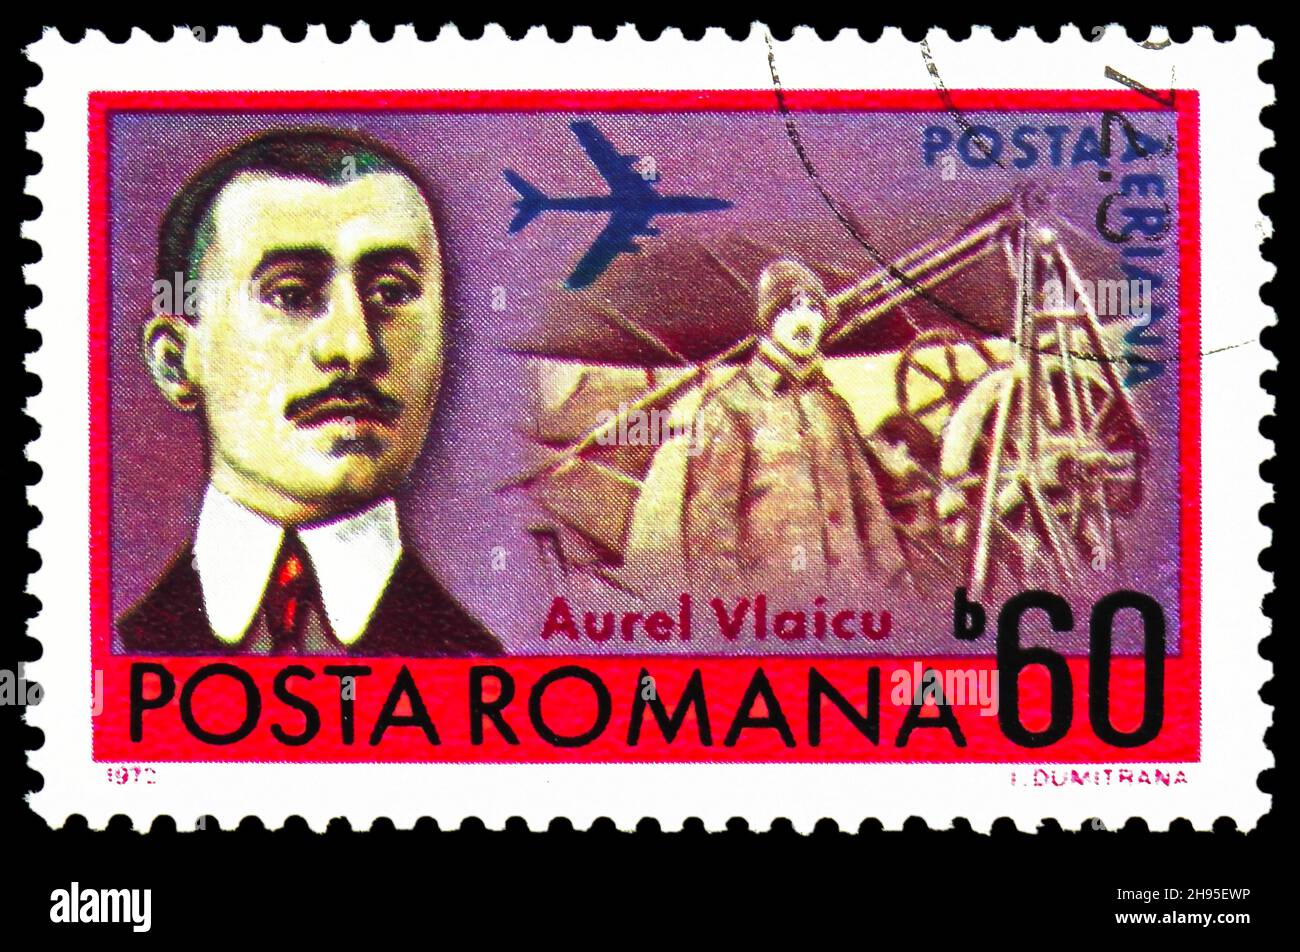 MOSCOW, RUSSIA - OCTOBER 24, 2021: Postage stamp printed in Romania shows Aurel Vlaicu (1882-1913), Romanian Aviation Pioneers serie, circa 1972 Stock Photo